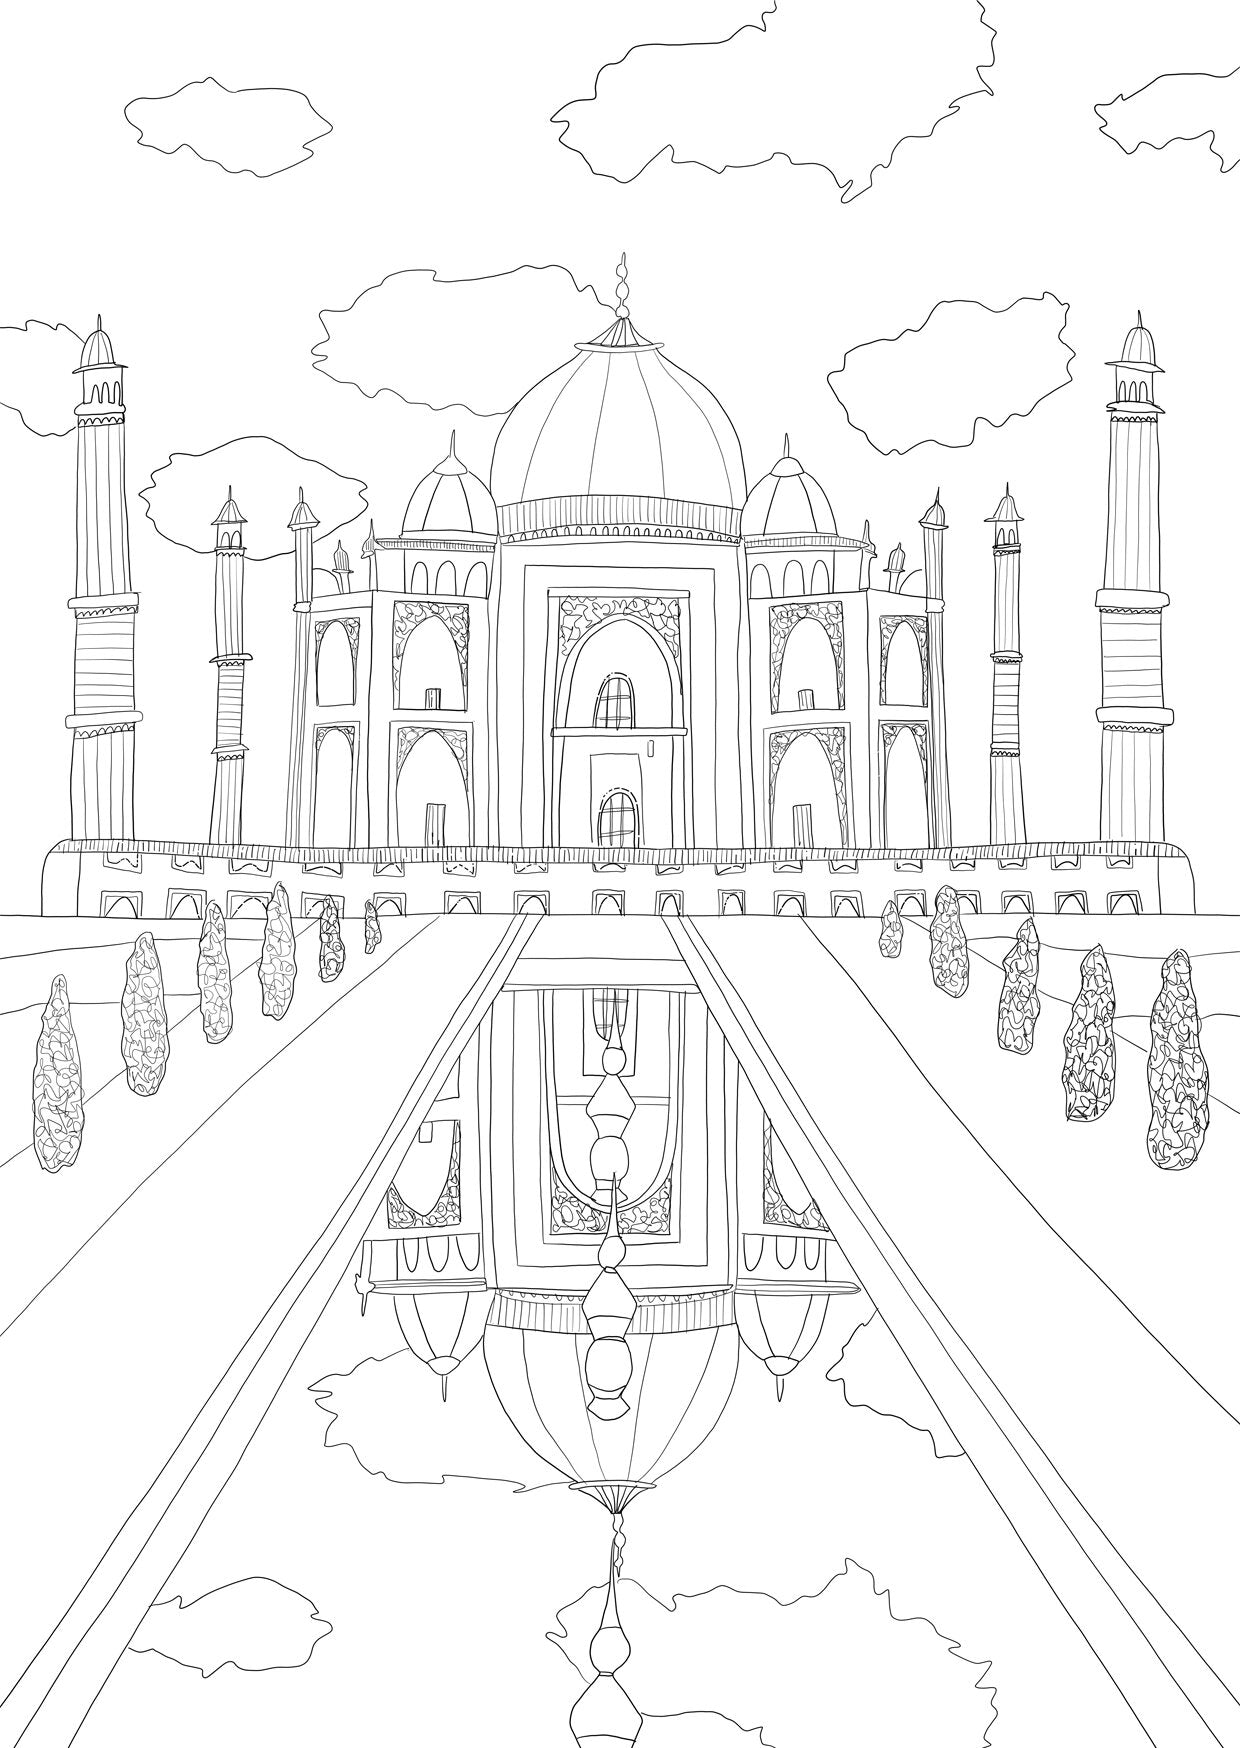 Drawing by Ahmed Ali - The Taj Mahal, Agra Drawing By Ahmed Ali  #drawingbyahmedali #pencildrawing #sketchbook #howtodraw #architecture  #architecturedrawing | Facebook